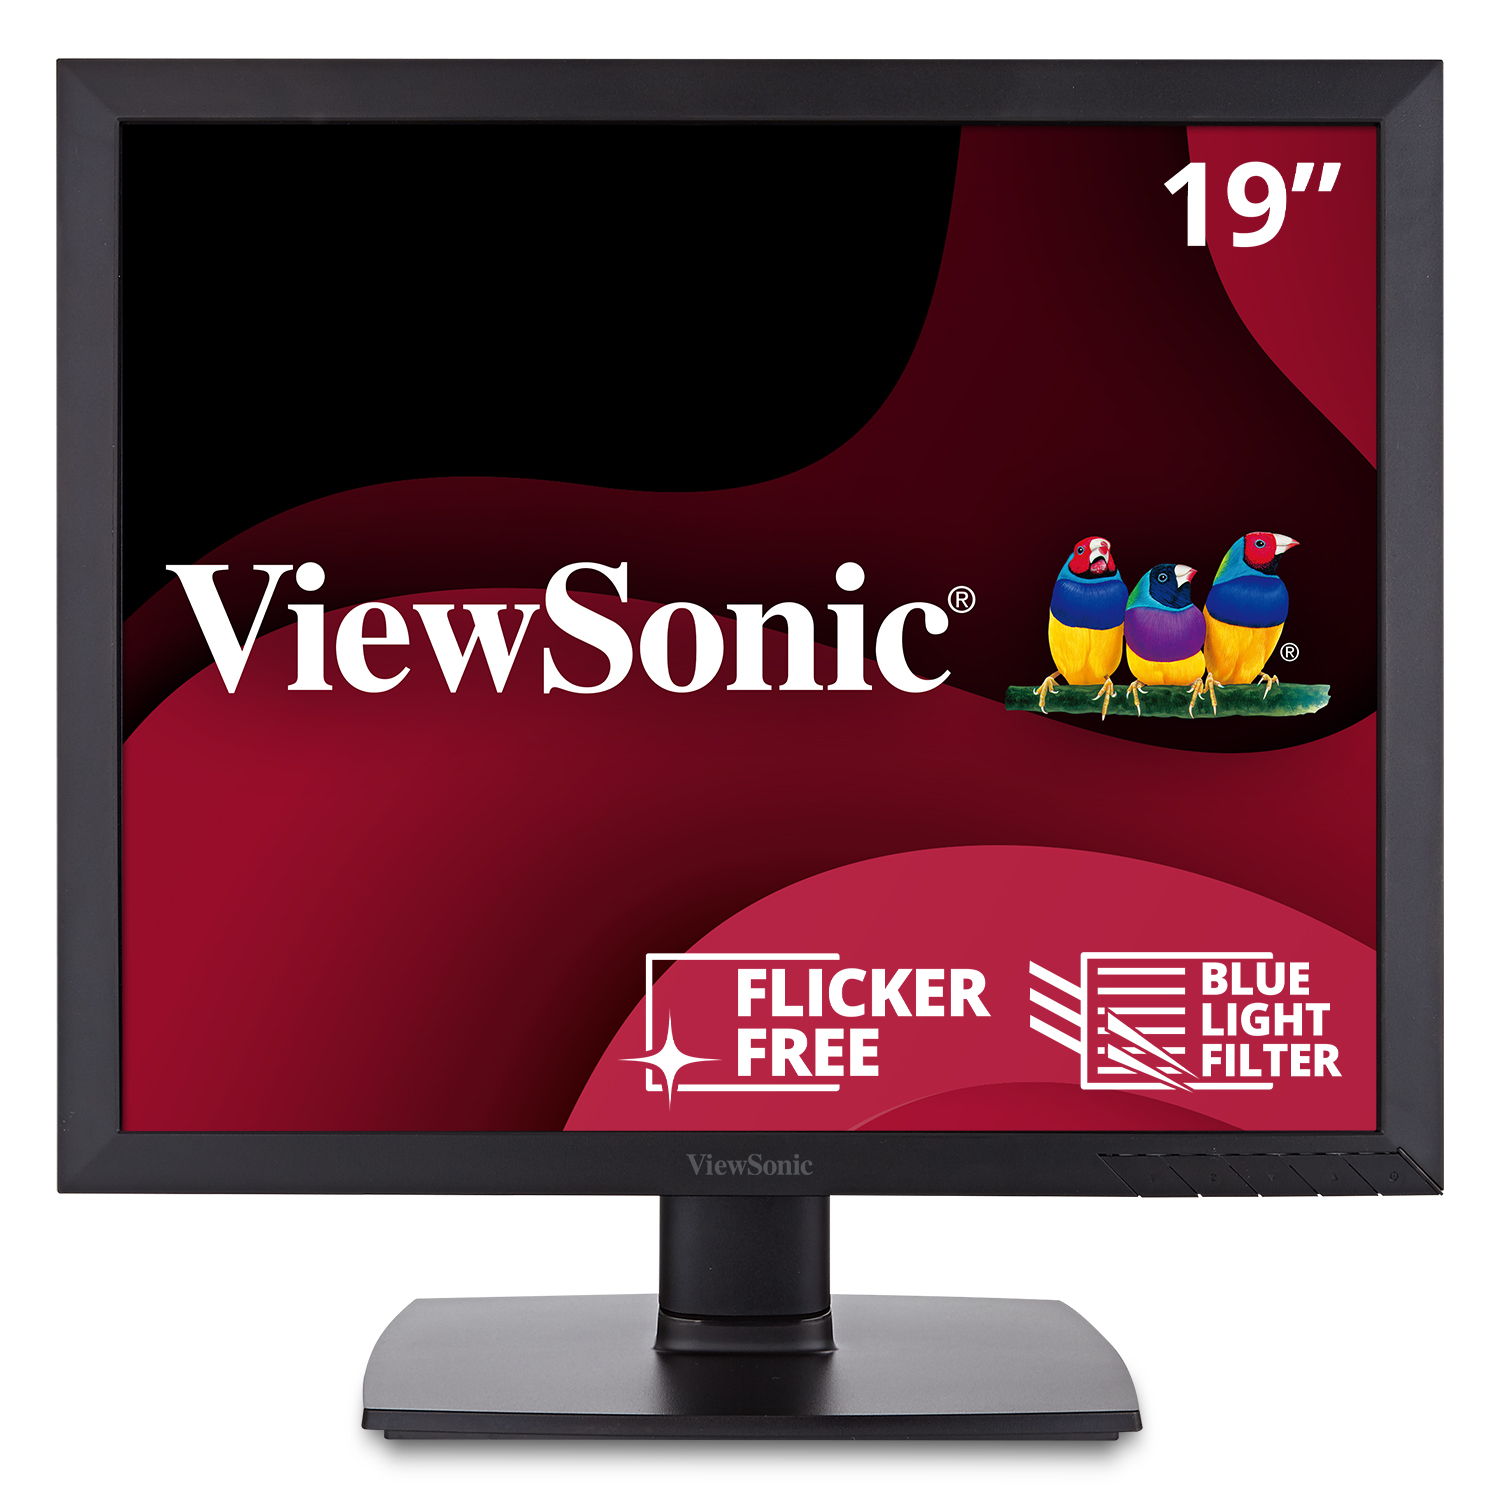 slide 1 of 7, show larger image, viewsonic va951s 19 inch ips 1024p led monitor with dvi vga and enhanced viewing comfort